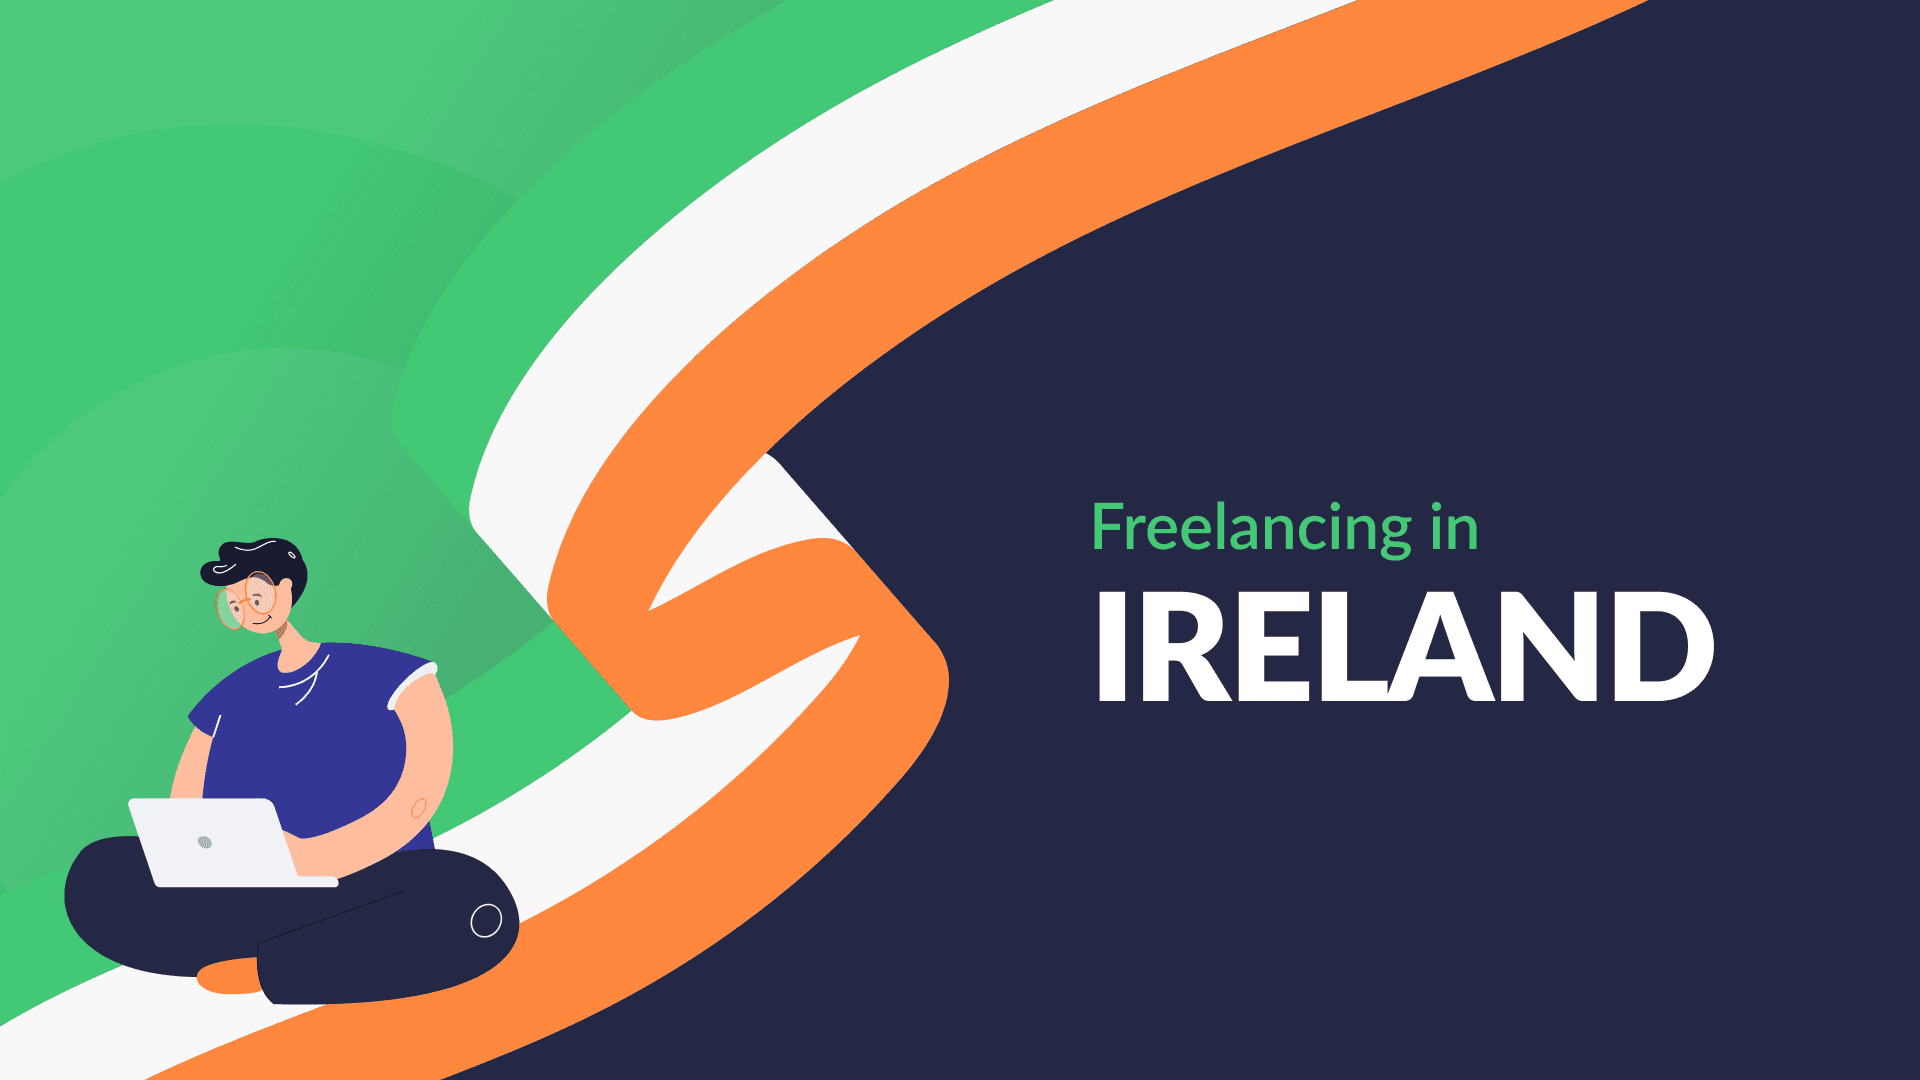 Image from freelancing-in-ireland-1024x576